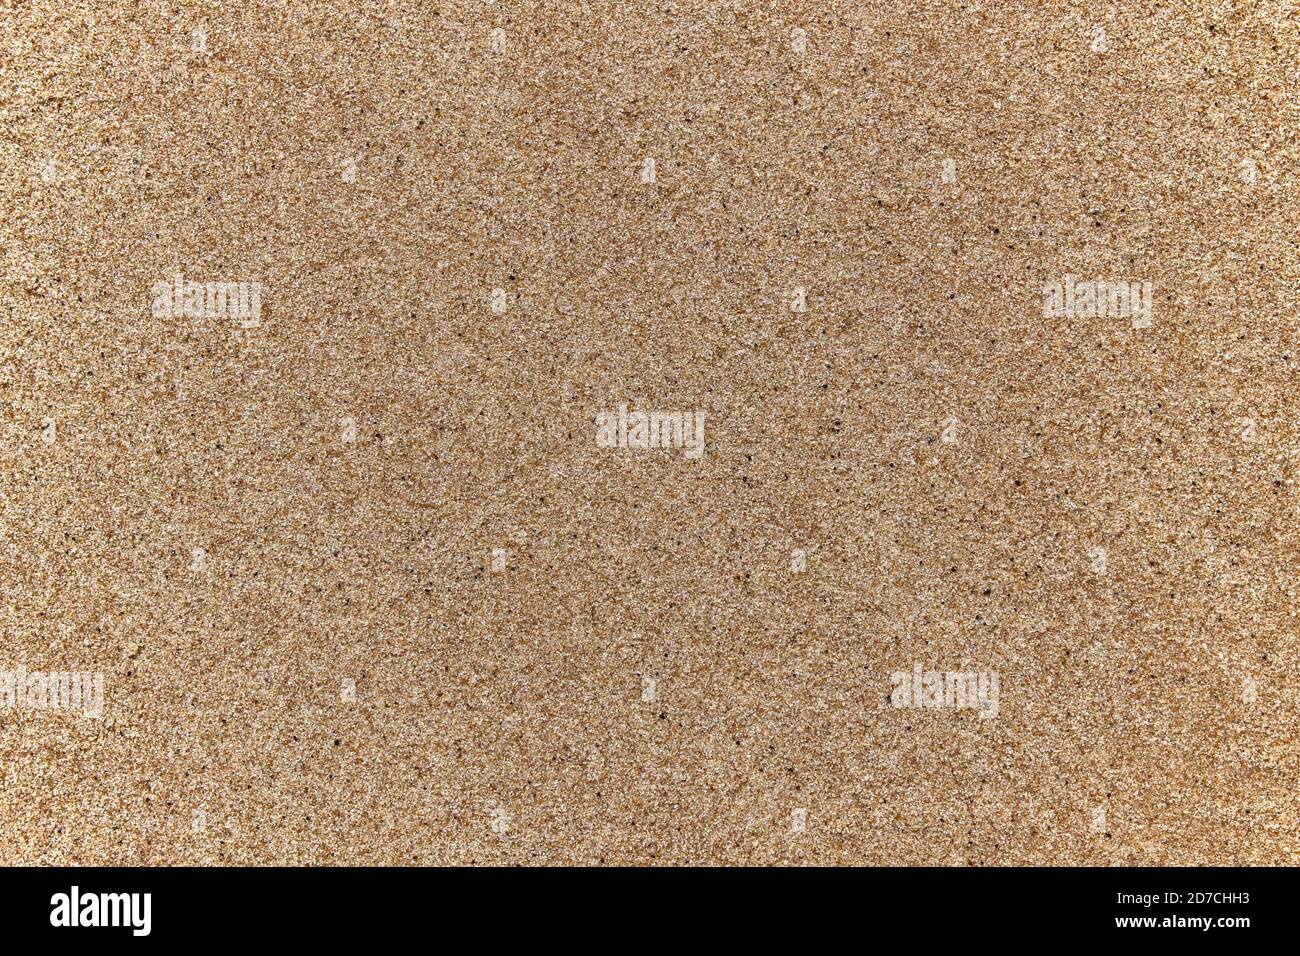 Top view of the sandy beach, the background has a copy area and a sandy texture where detail of small pebbles is visible. Stock Photo